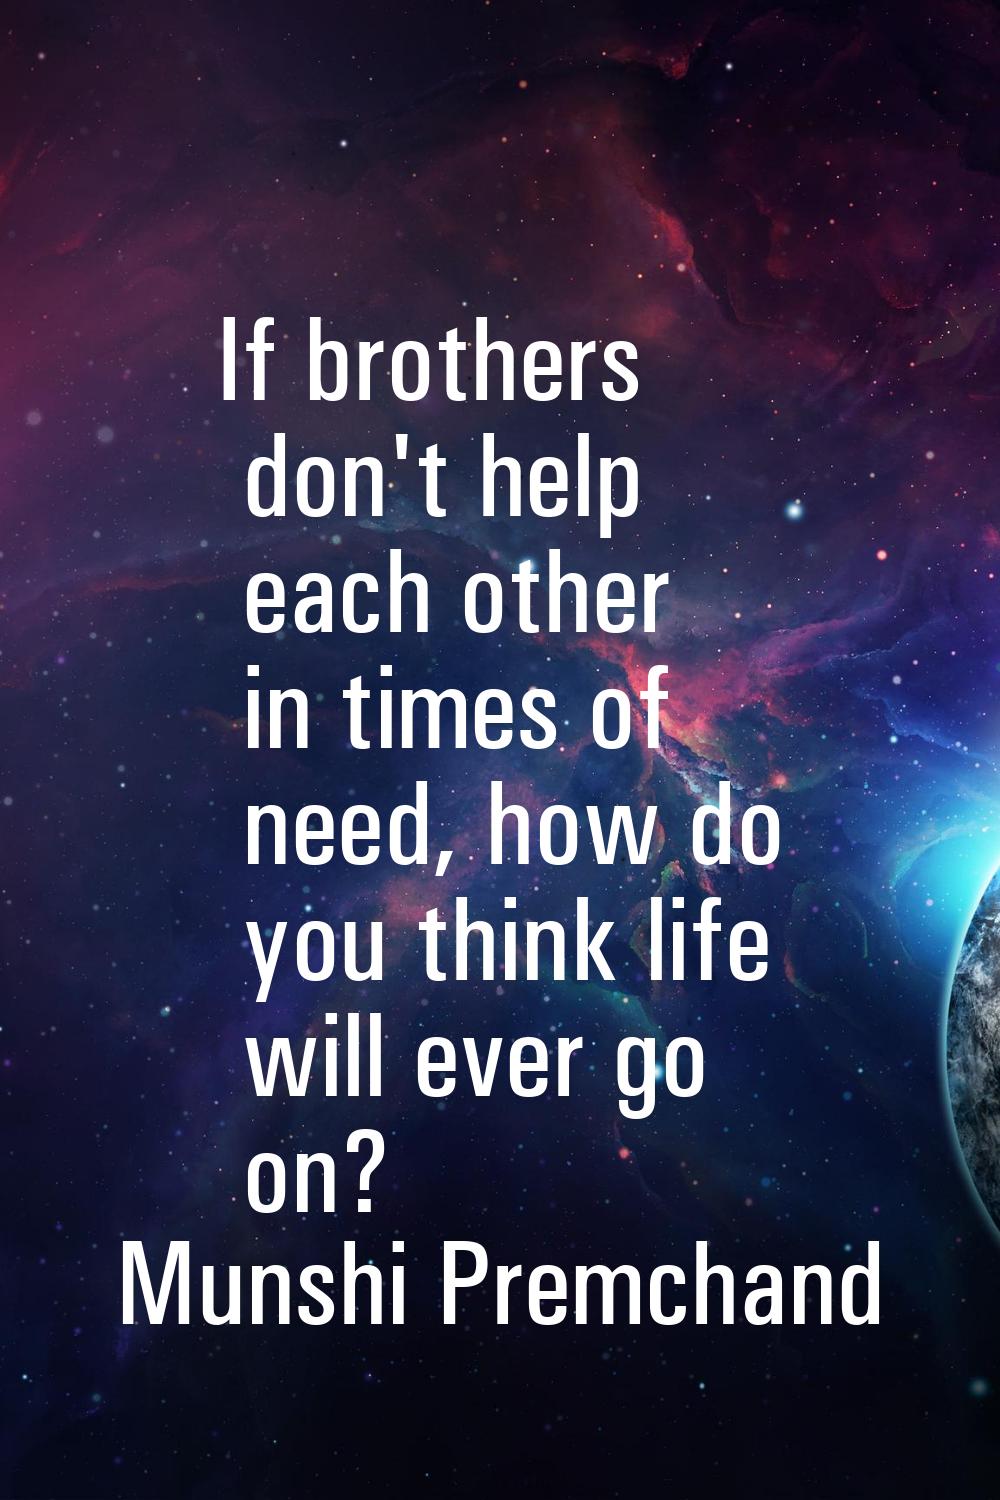 If brothers don't help each other in times of need, how do you think life will ever go on?